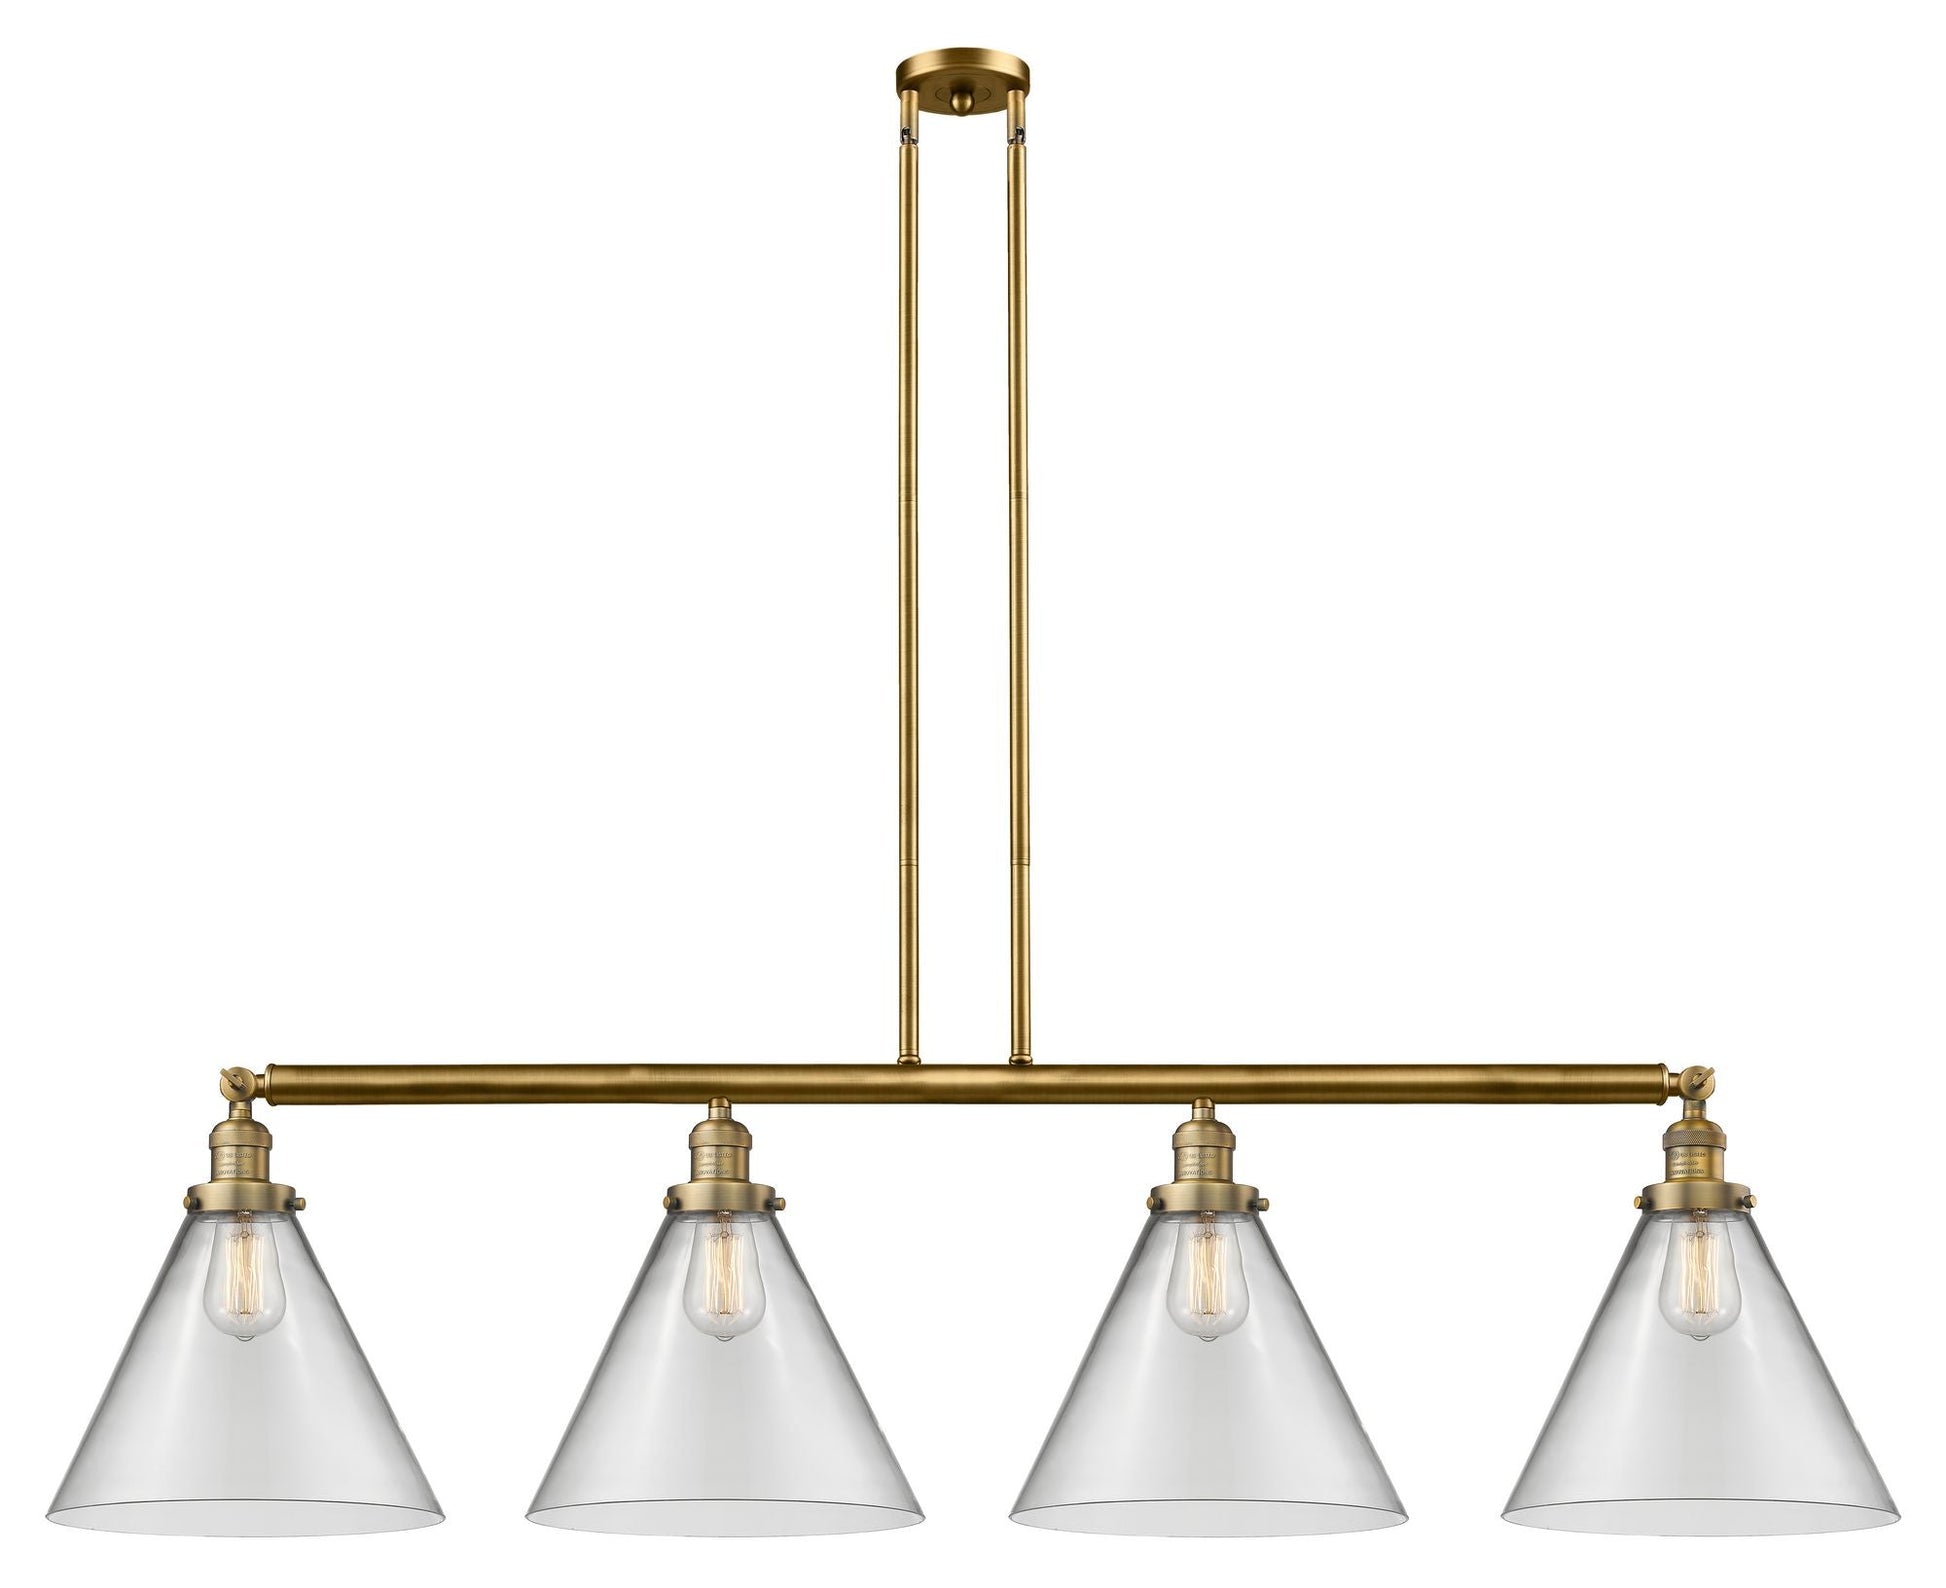 214-BB-G42-L 4-Light 56" Brushed Brass Island Light - Clear Cone 12" Glass - LED Bulb - Dimmensions: 56 x 12 x 14<br>Minimum Height : 24.25<br>Maximum Height : 48.25 - Sloped Ceiling Compatible: Yes